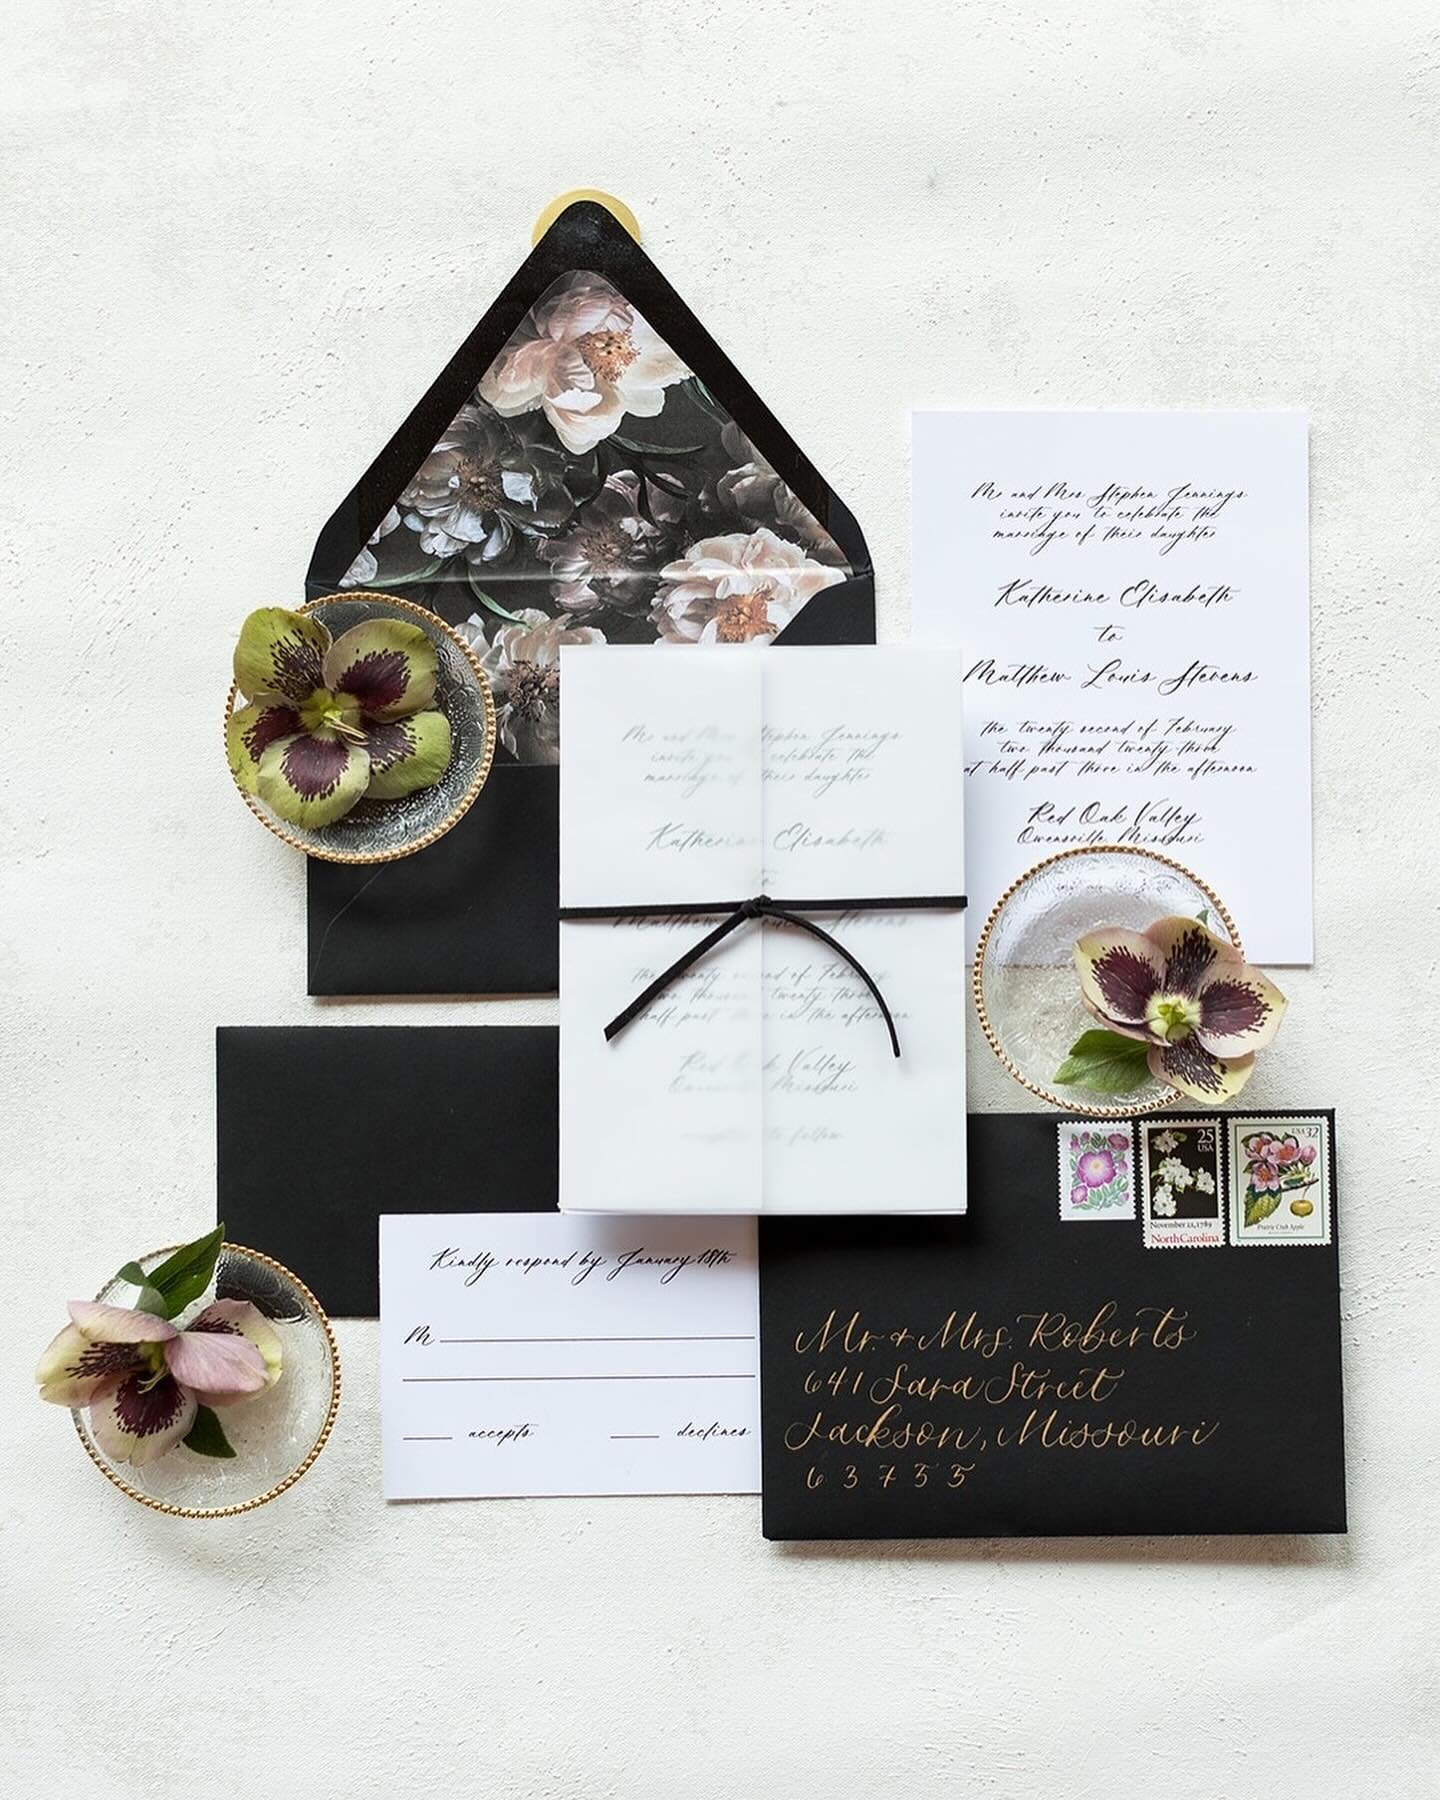 Through my camera lens, I witness your wedding style come alive in every detail of your invitation suite. 📸✨
⠀⠀⠀⠀⠀⠀⠀⠀⠀
From the vintage postage to the floral envelope liner, your guests get a taste of what your wedding celebration will be like. Payi